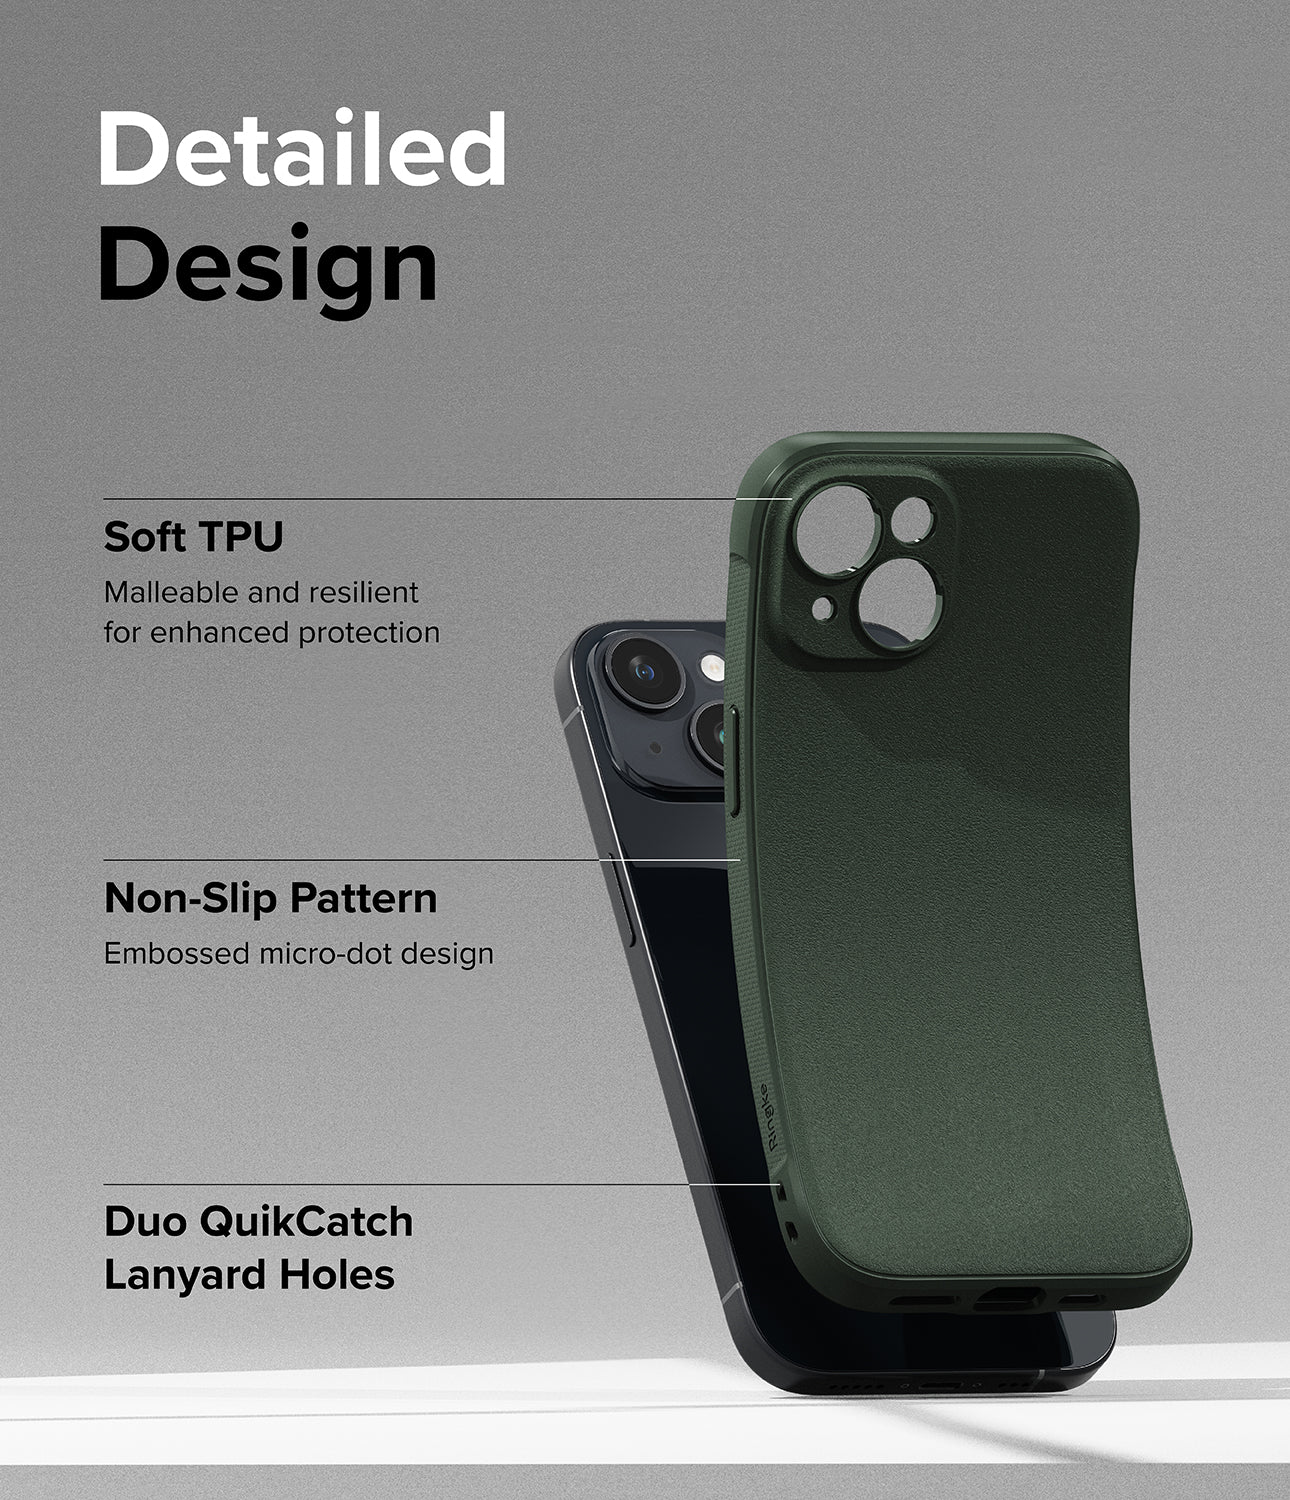 iPhone 15 Case | Onyx - Dark Green - Detailed Design. Malleable and resilient for enhanced protection with Soft TPU. Embossed micro-dot design. Non-Slip Pattern. Duo QuikCatch Lanyard Holes.